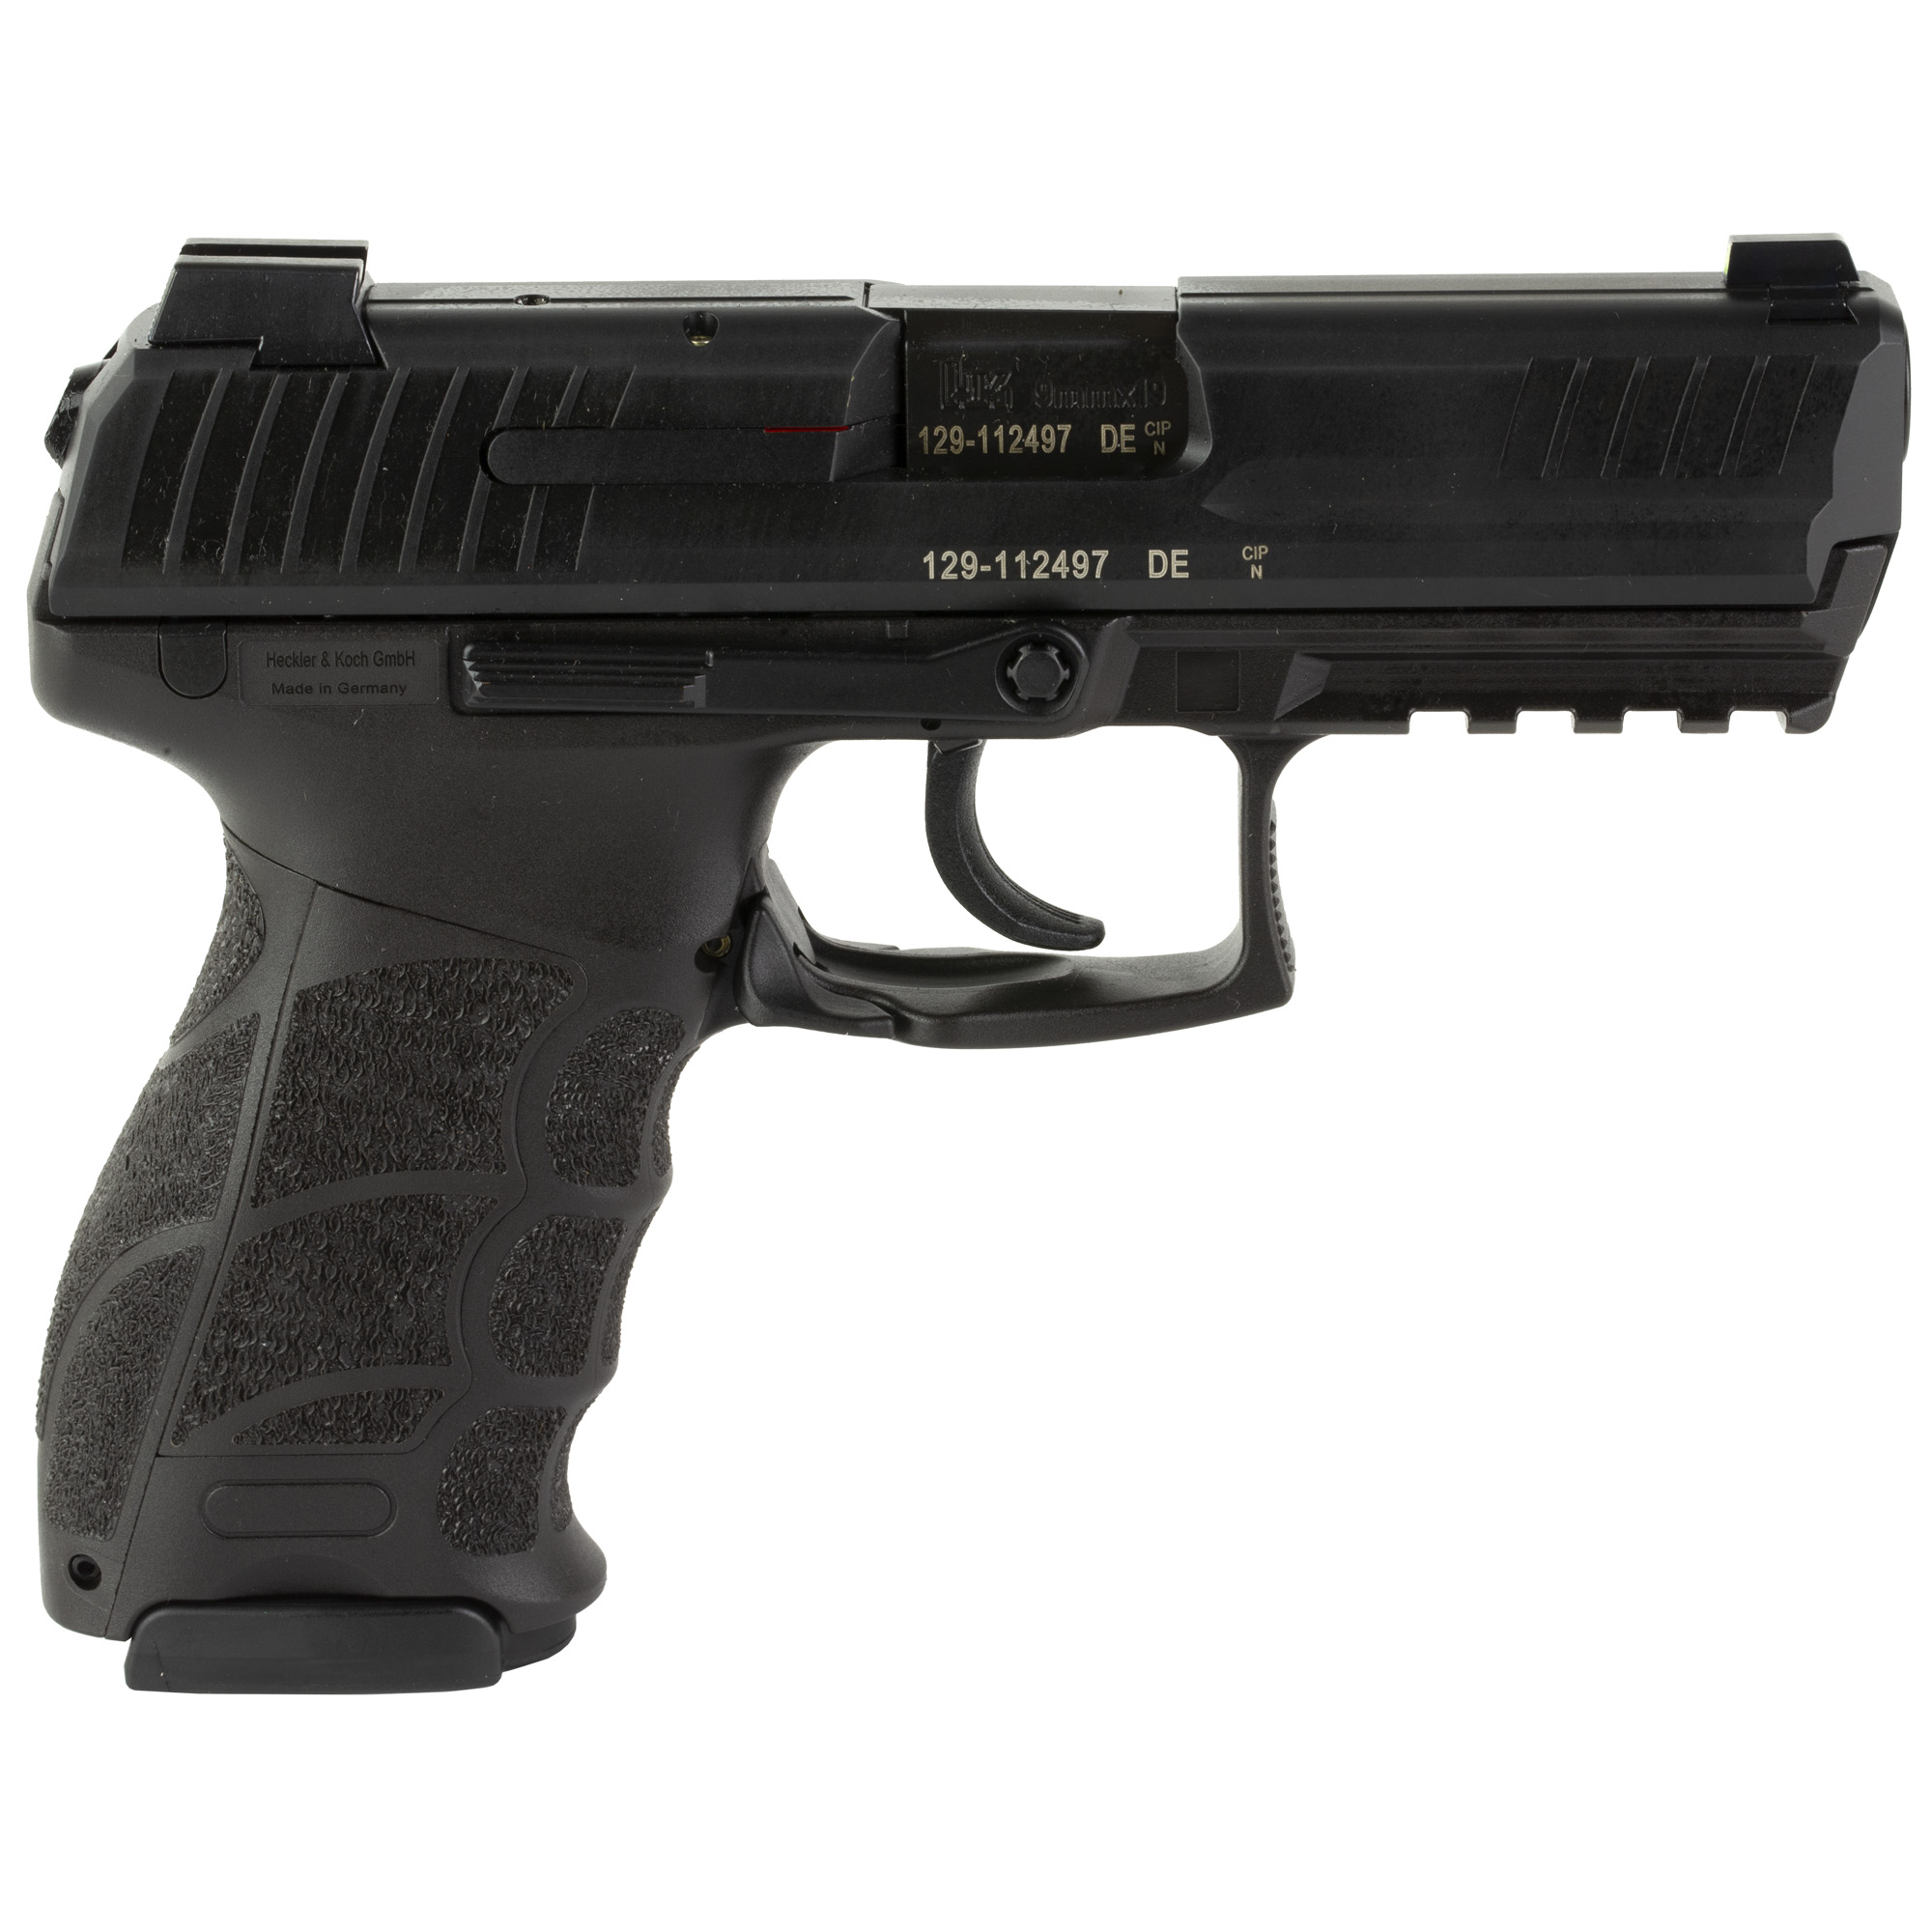 USED IN LIKE NEW CONDITION / HK, P30, LEM-Double Action Only, Semi-automatic, Polymer Frame Pistol, Full Size, 9MM, 3.85" Barrel, Matte Finish, Black, Interchangeable Grip Panels, Night Sights, 17 Rounds, 3 Magazines